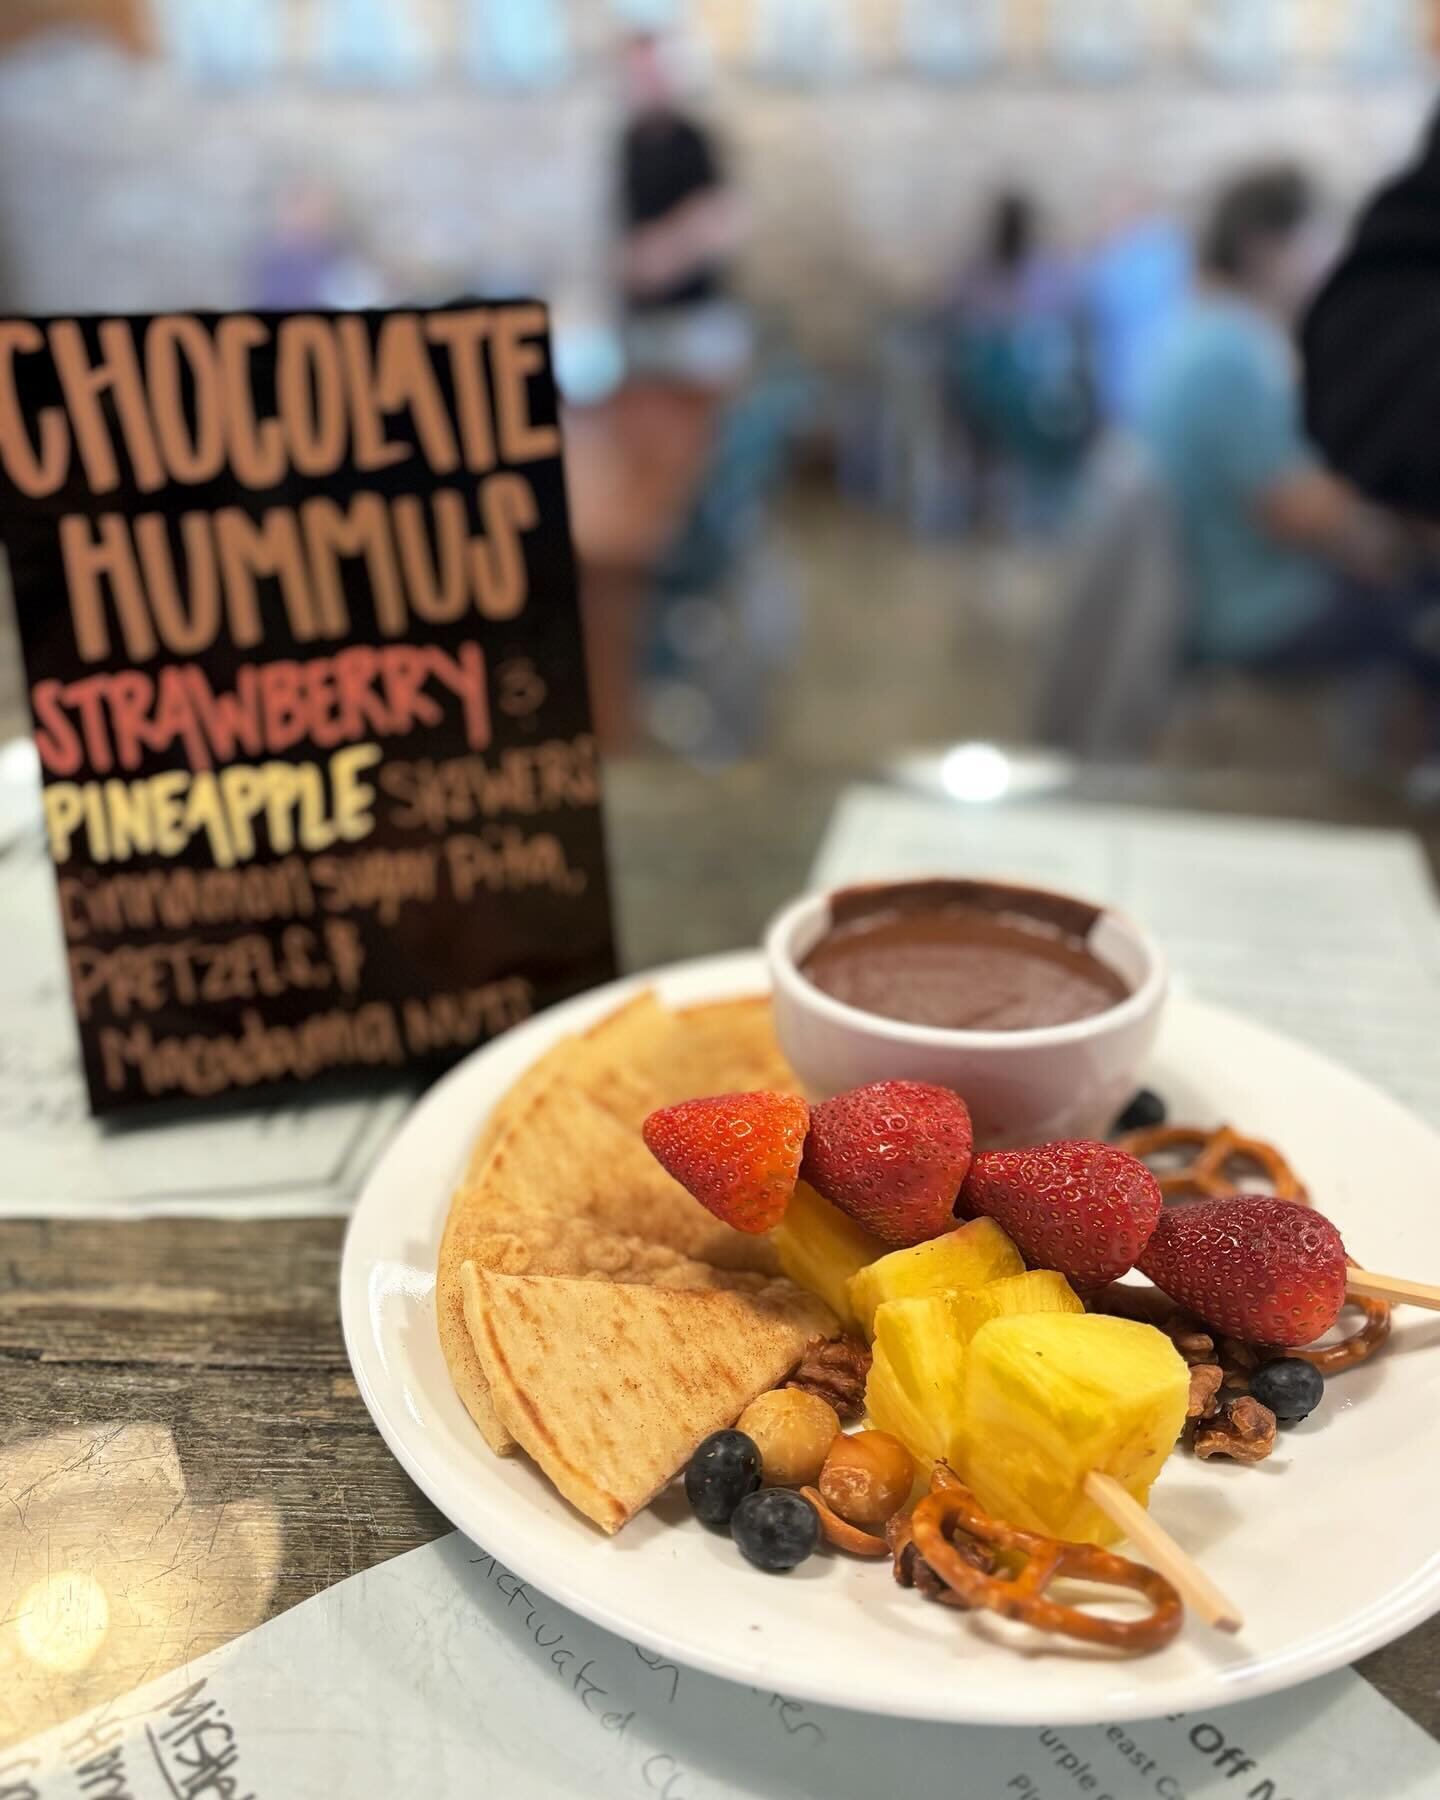 Special of the day : house-made chocolate hummus . Served with cinnamon sugar pita, strawberry and pineapple skewers, pretzels, and roasted macadamia nuts. *vegan* #warehousebakeryanddonuts #fairhope #fairhopealabama #madefromscratch #hummus #chocola